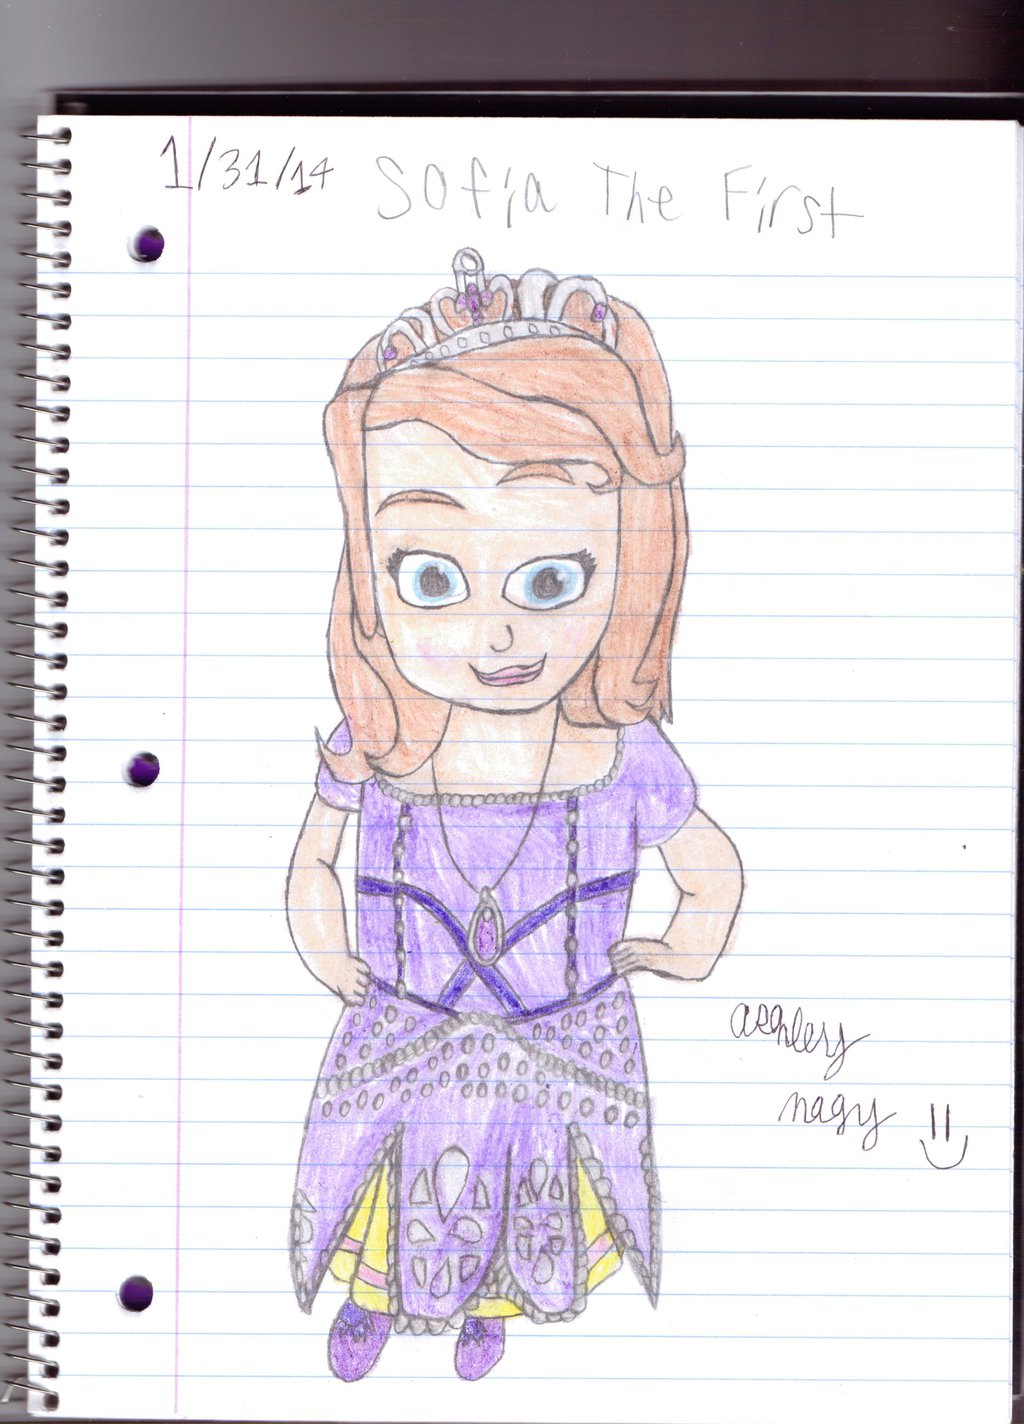 Amazing How To Draw Sofia The First Step By Step in the world Learn more here 